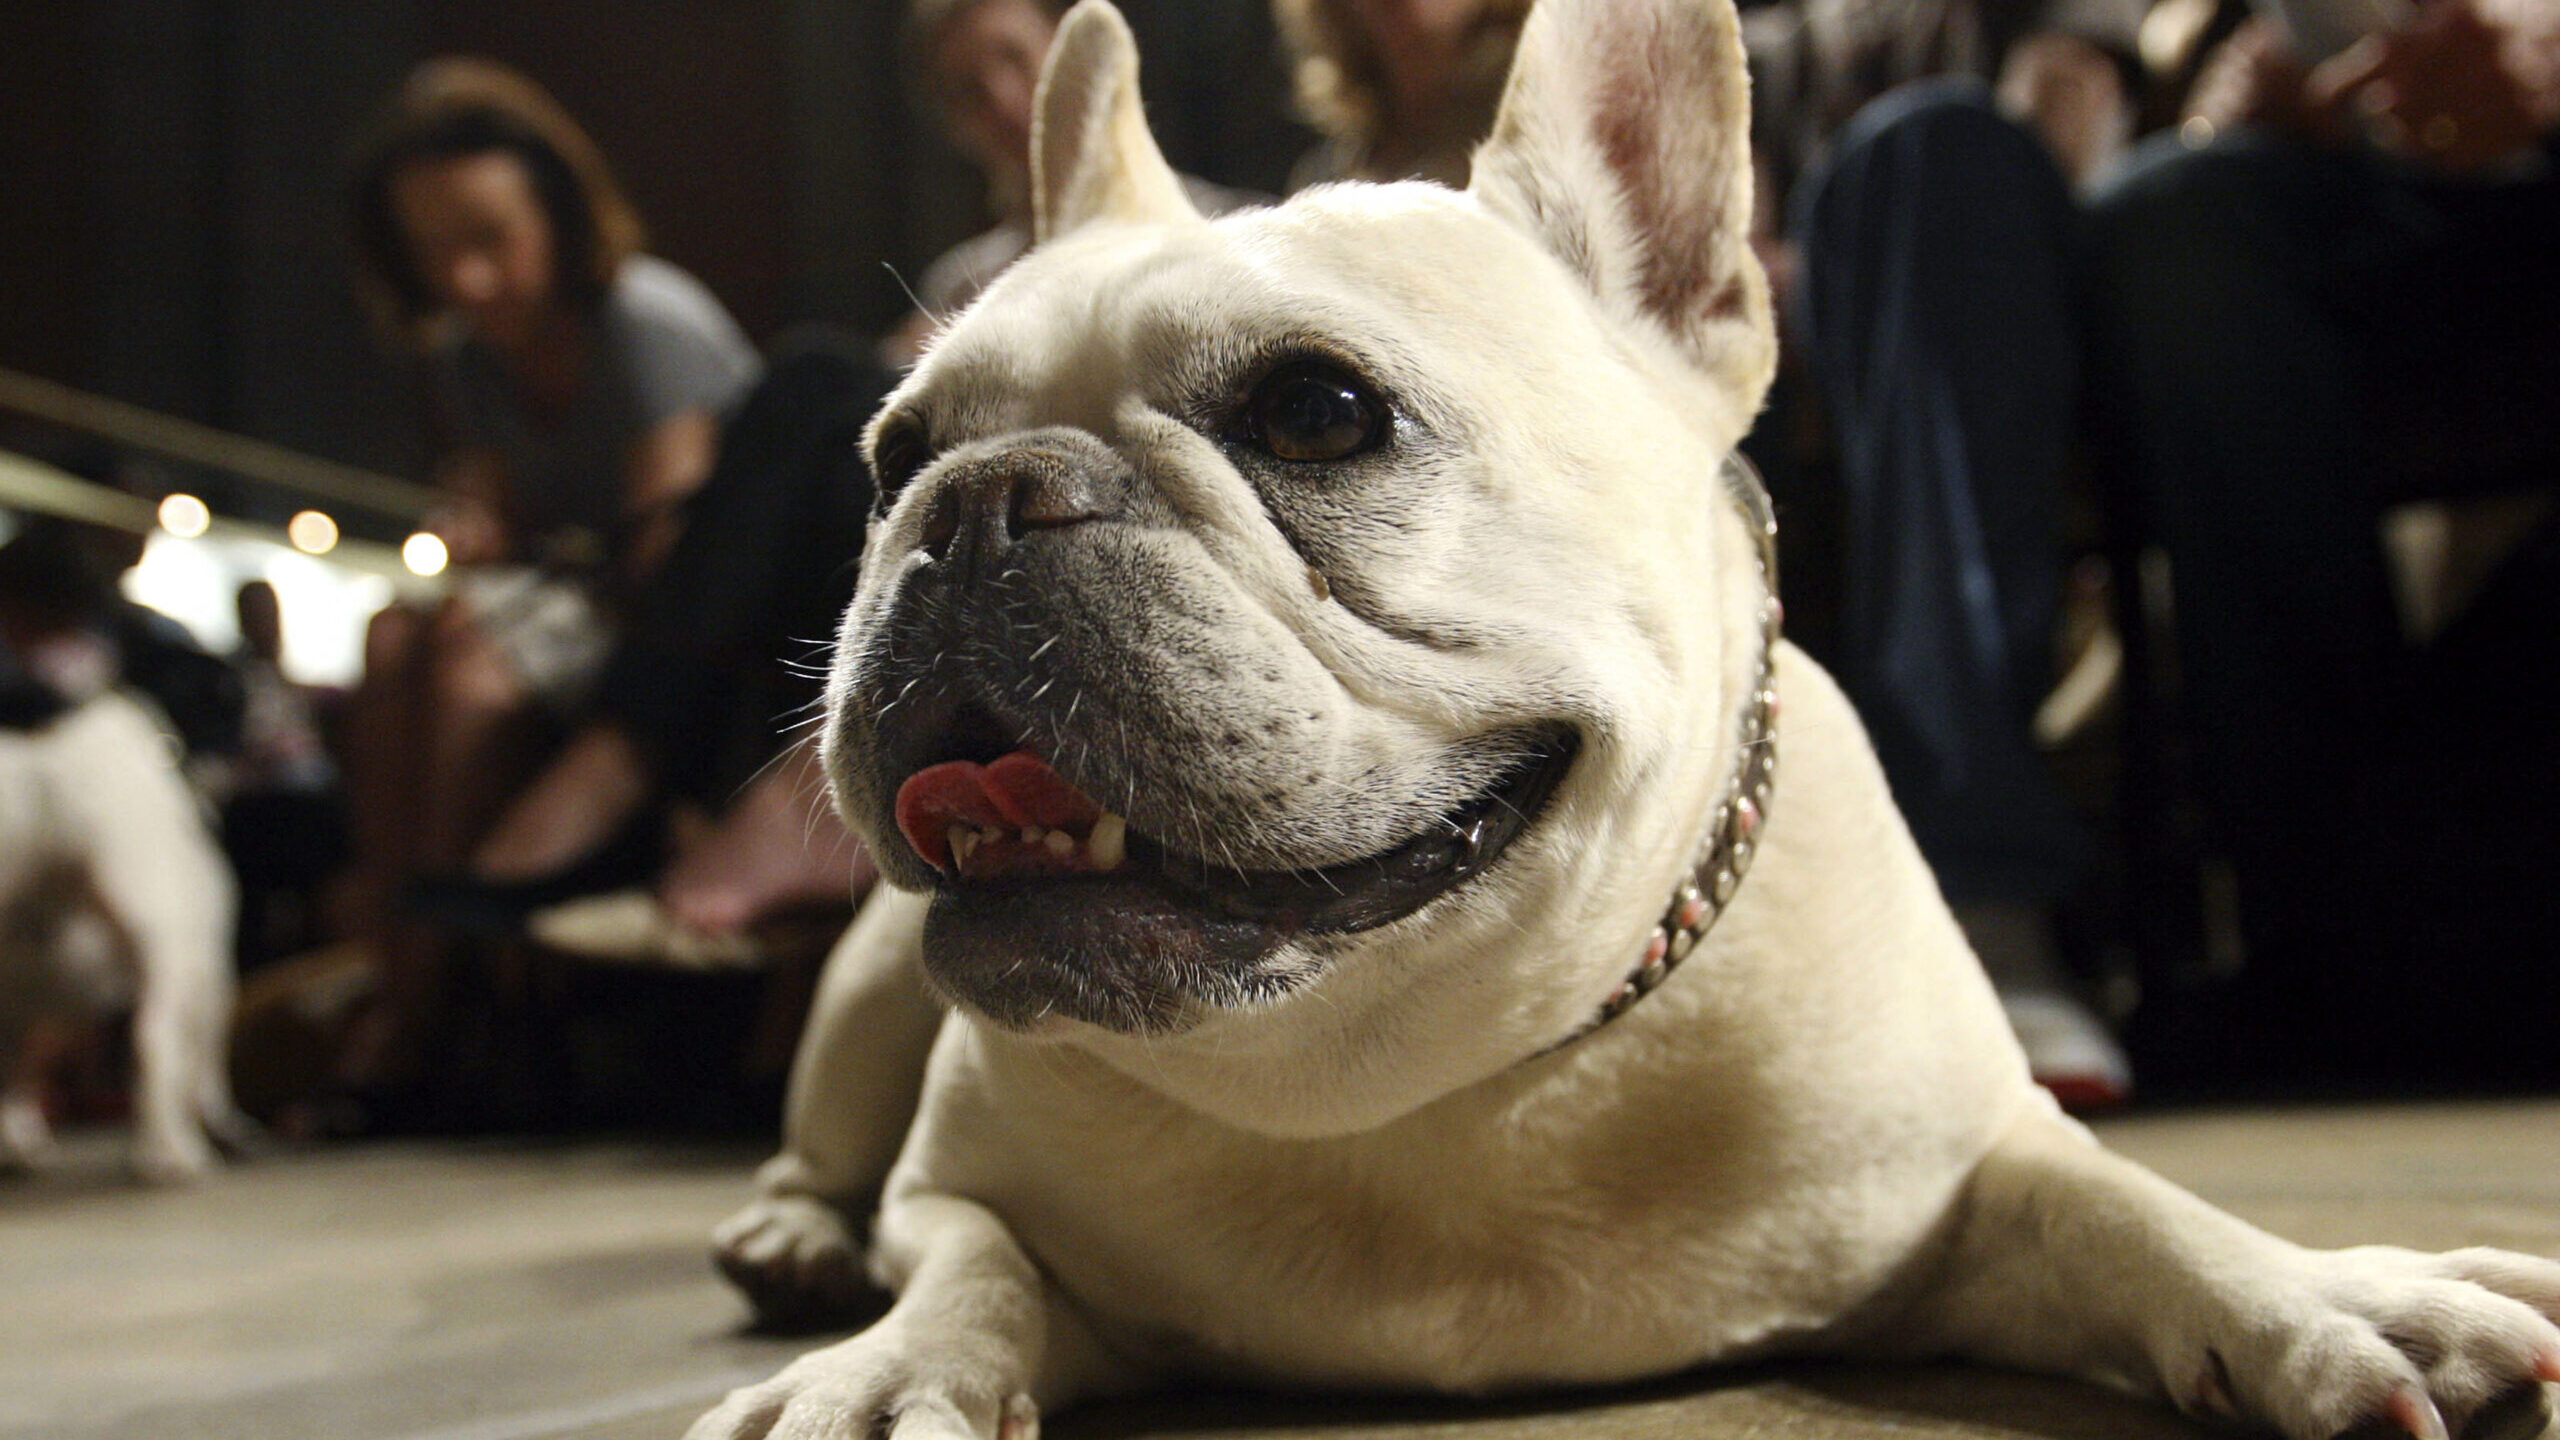 For the first time in three decades, the U.S. has a new favorite dog breed, according to the Americ...